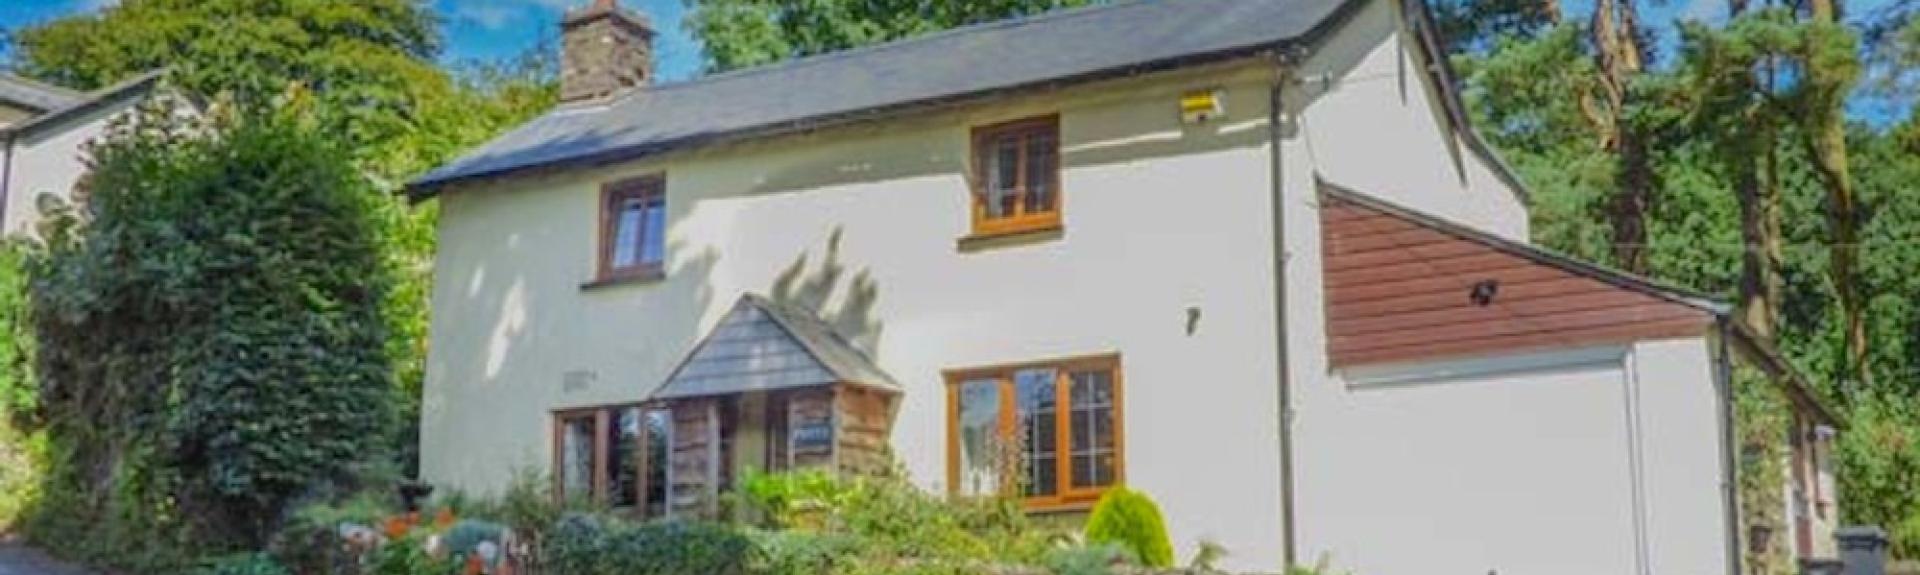 The exterior of a double-fronted Exmoor holiday cottage overlooks a front garden and is surrounded by trees.